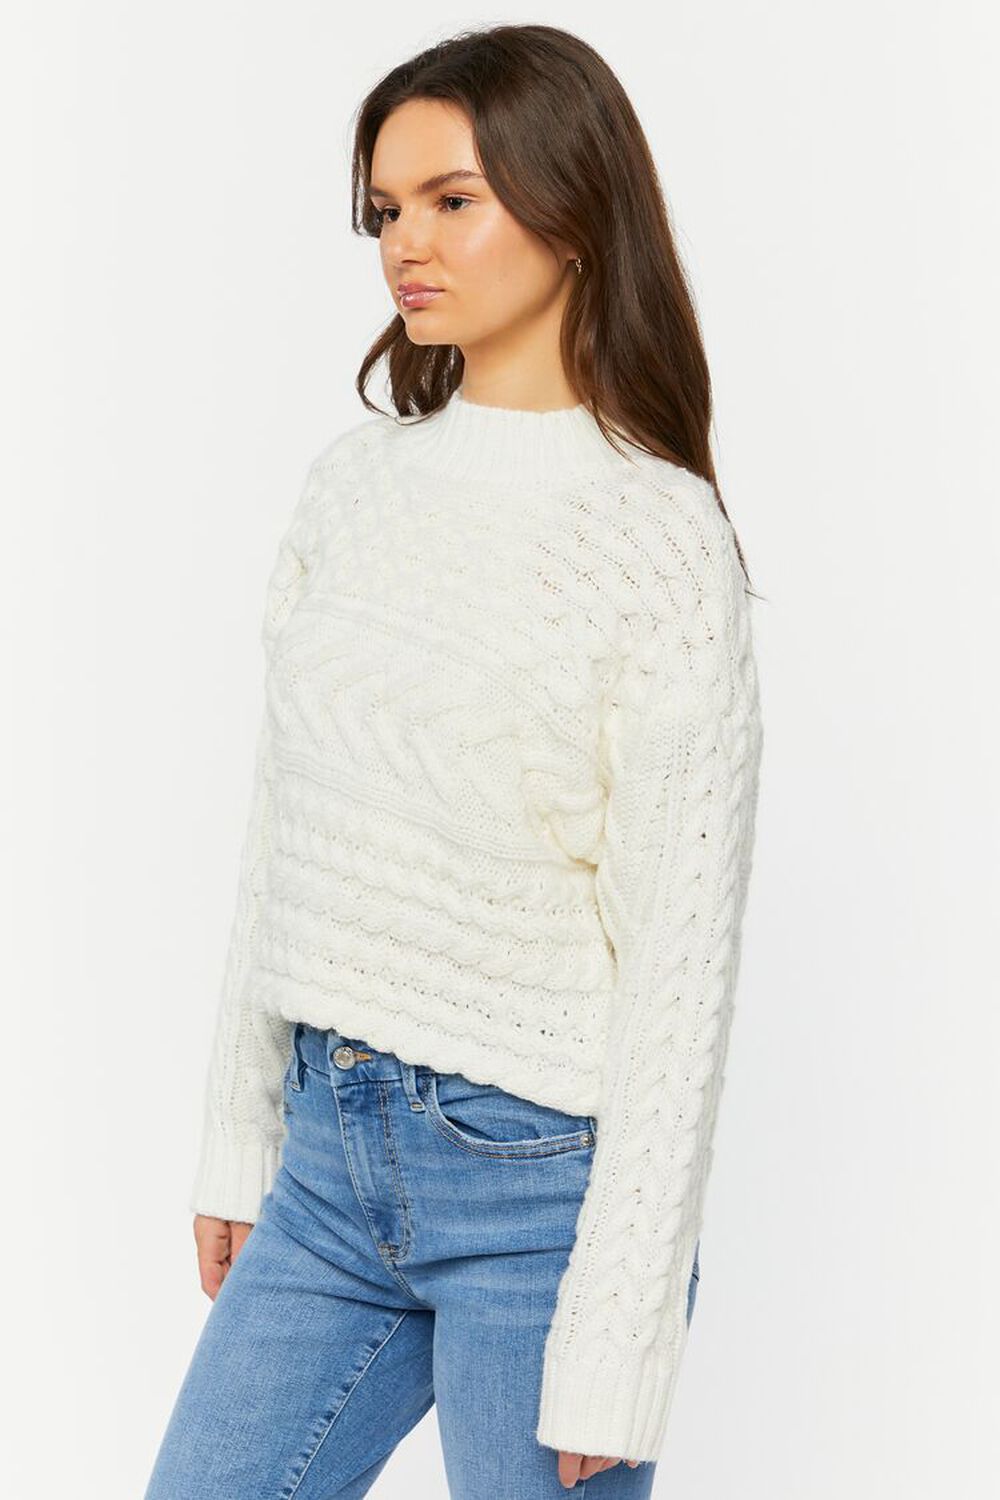 VANILLA Cable Knit Mock Neck Sweater, image 2